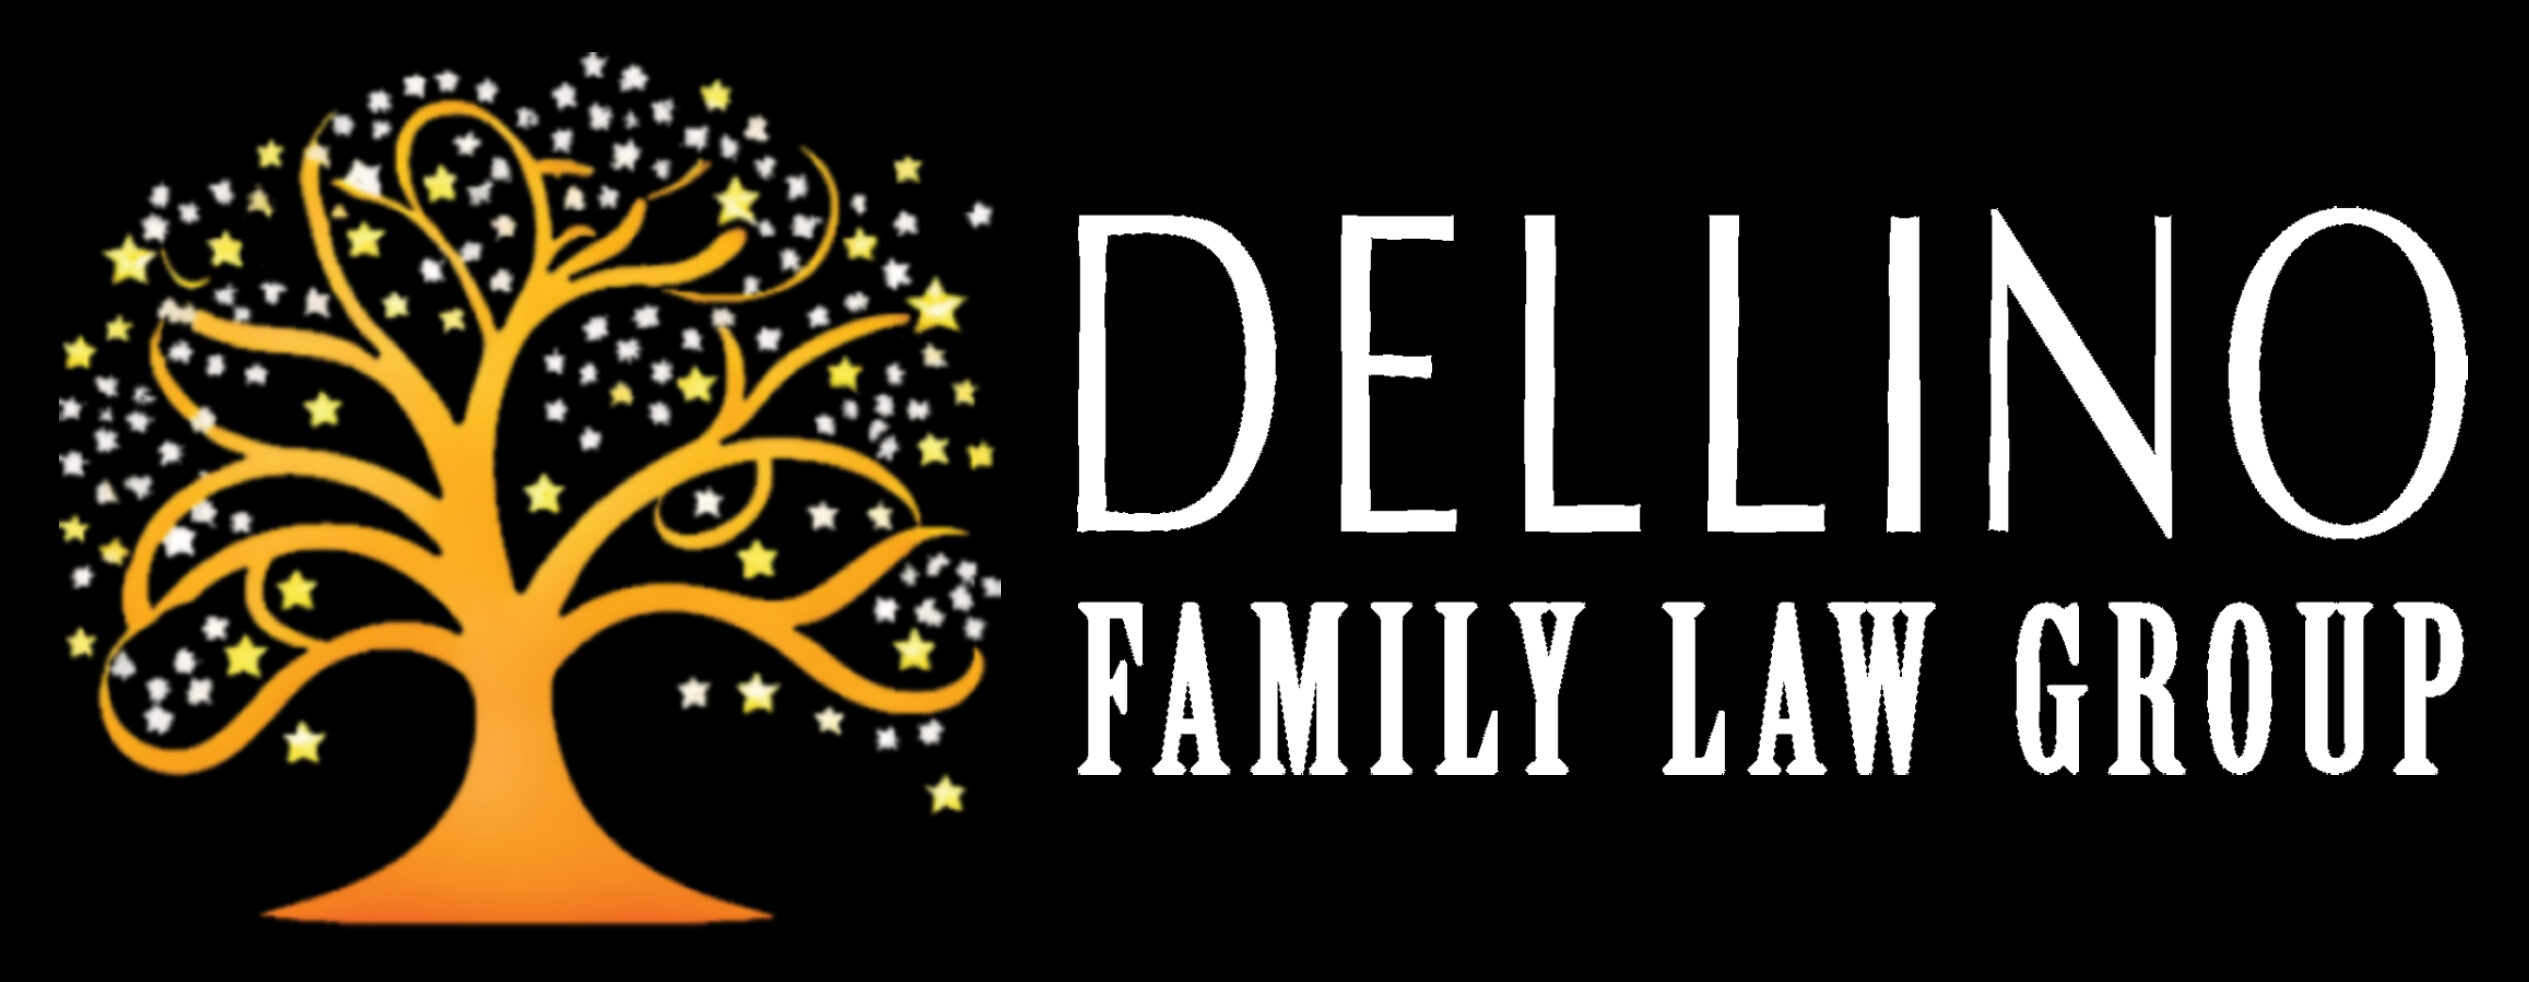 Dellino Family Law Group | Experienced Seattle Attorneys | Call 24/7 | Dellino Family Law Group